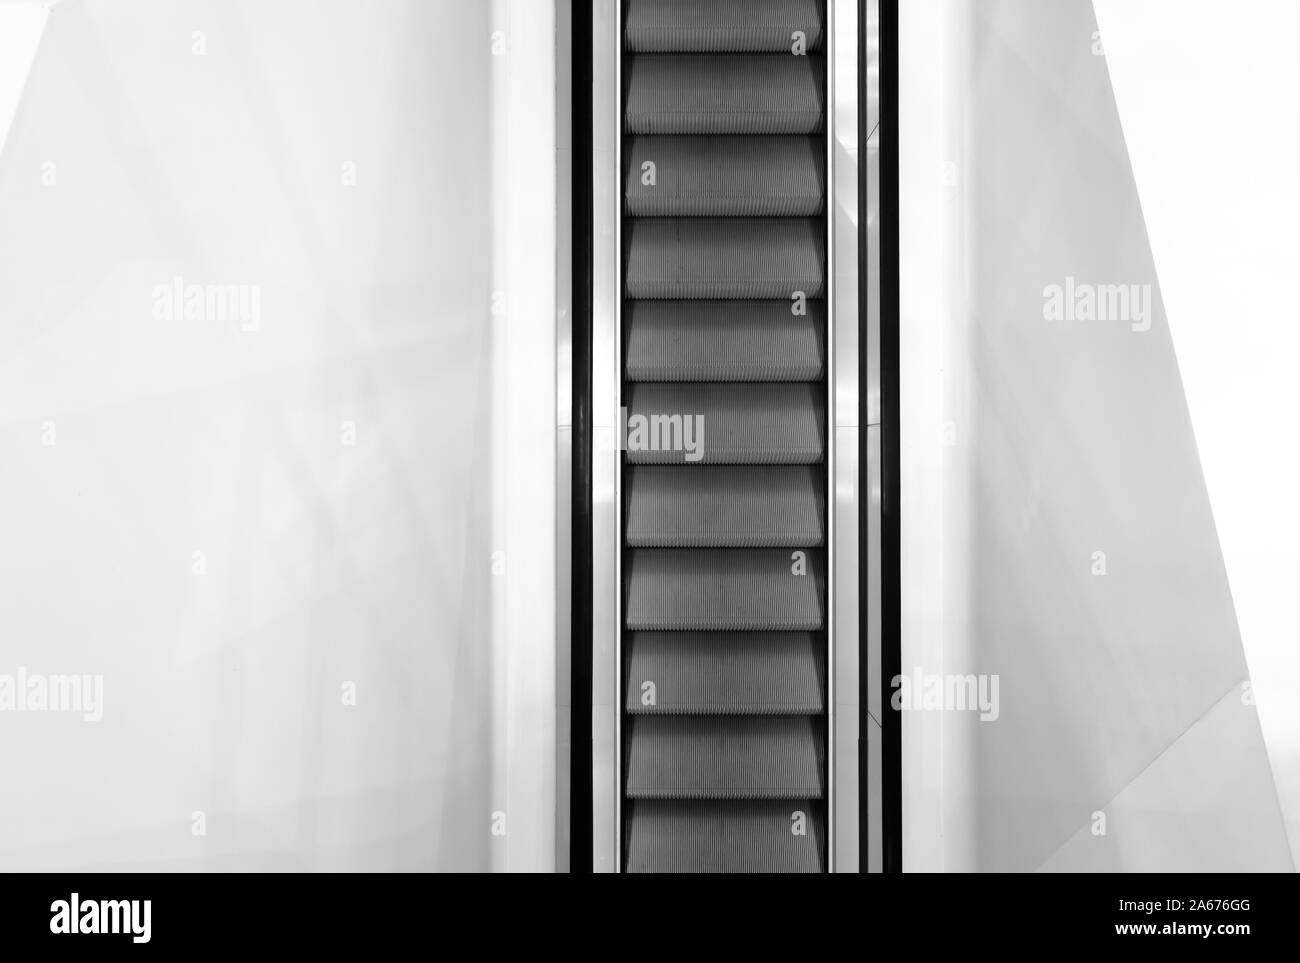 Escalator in white color wall,Moving up staircase. electric escalator Stock Photo